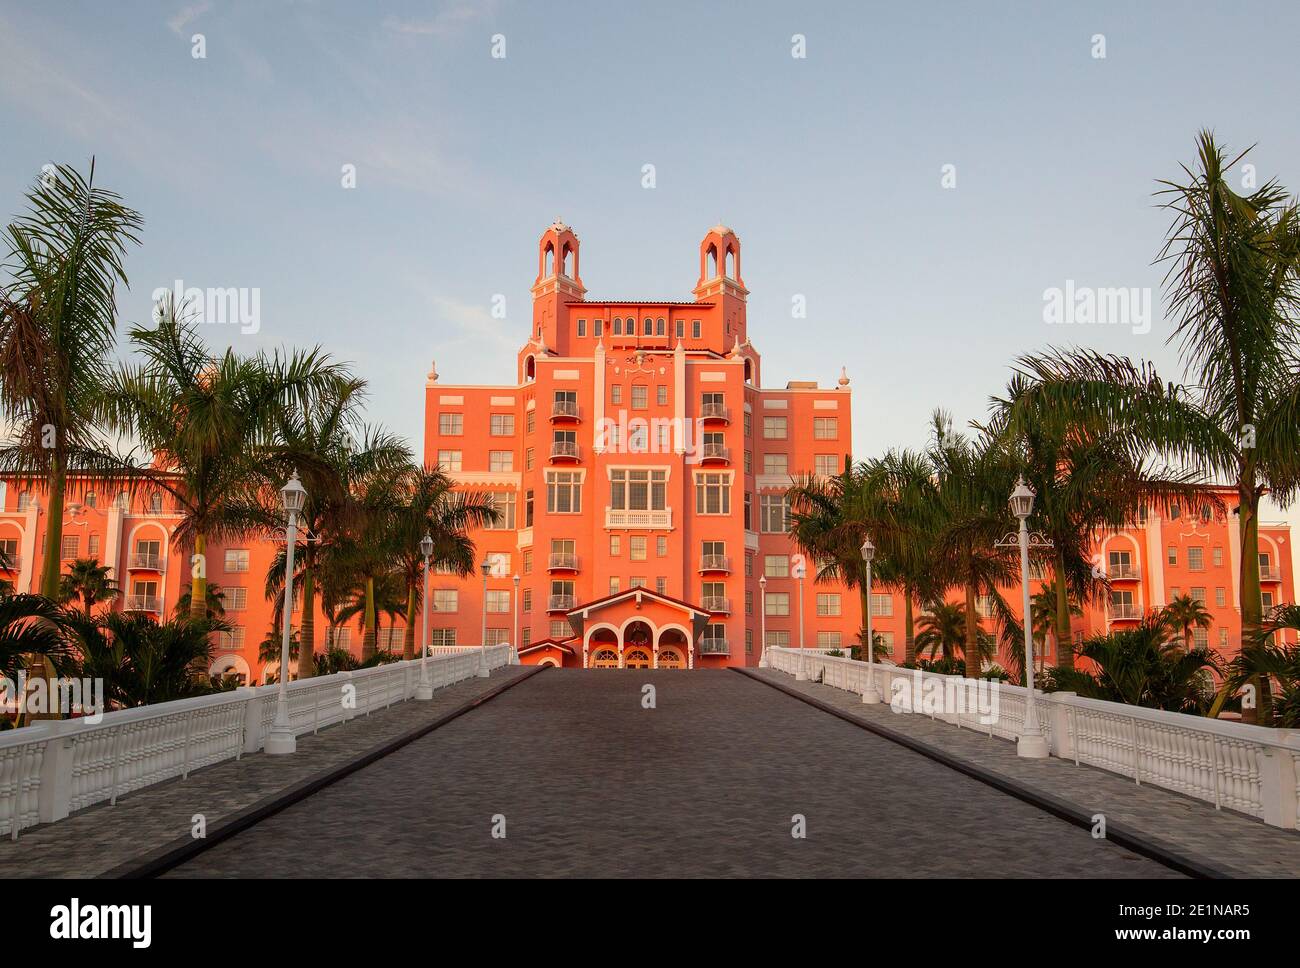 The iconic Don Cesar hotel in St. Petersburg Florida. Pink Hotel on the beach in Florida. Stock Photo